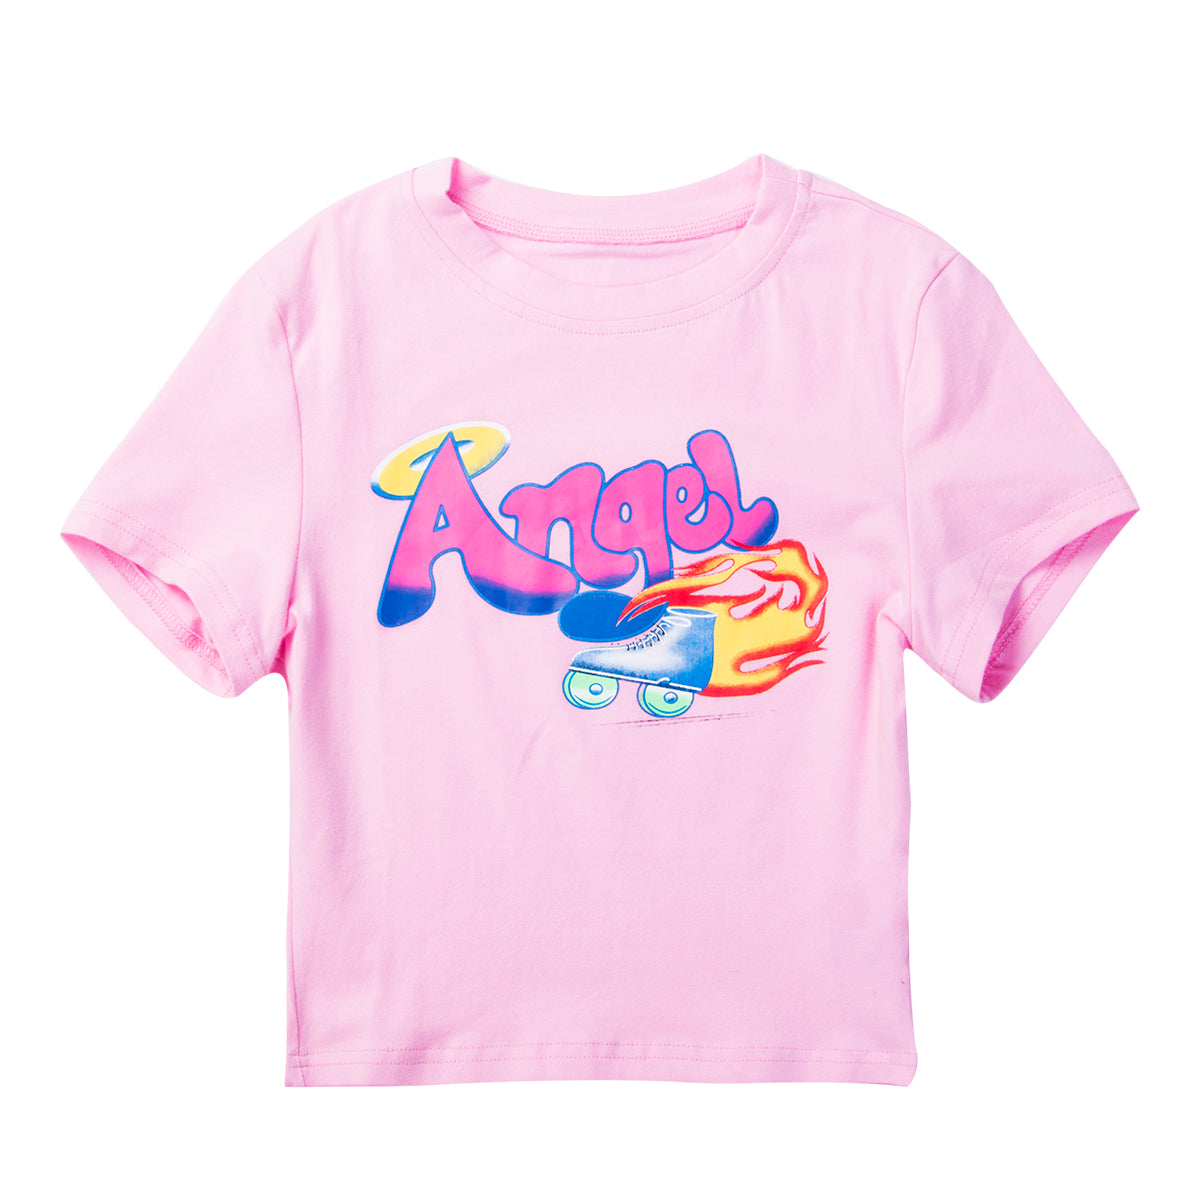 Angel Graphic Tee Preppy Aesthetic Crop Top – The Preppy Place